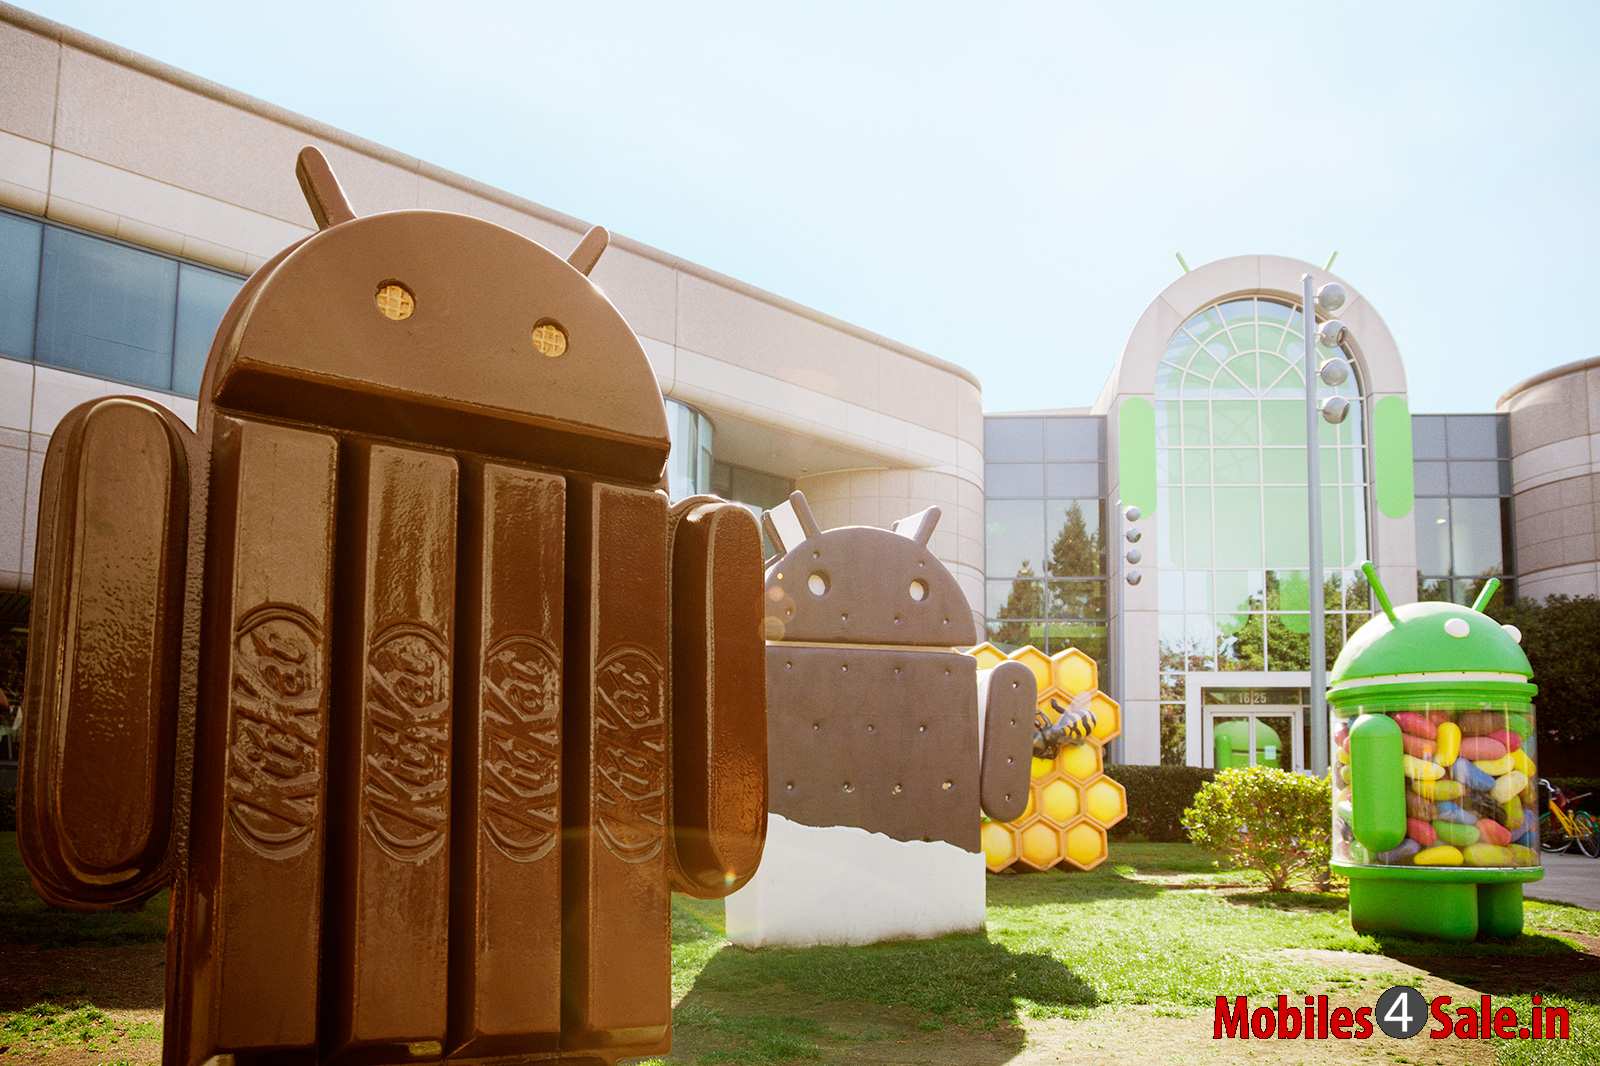 Android from Google